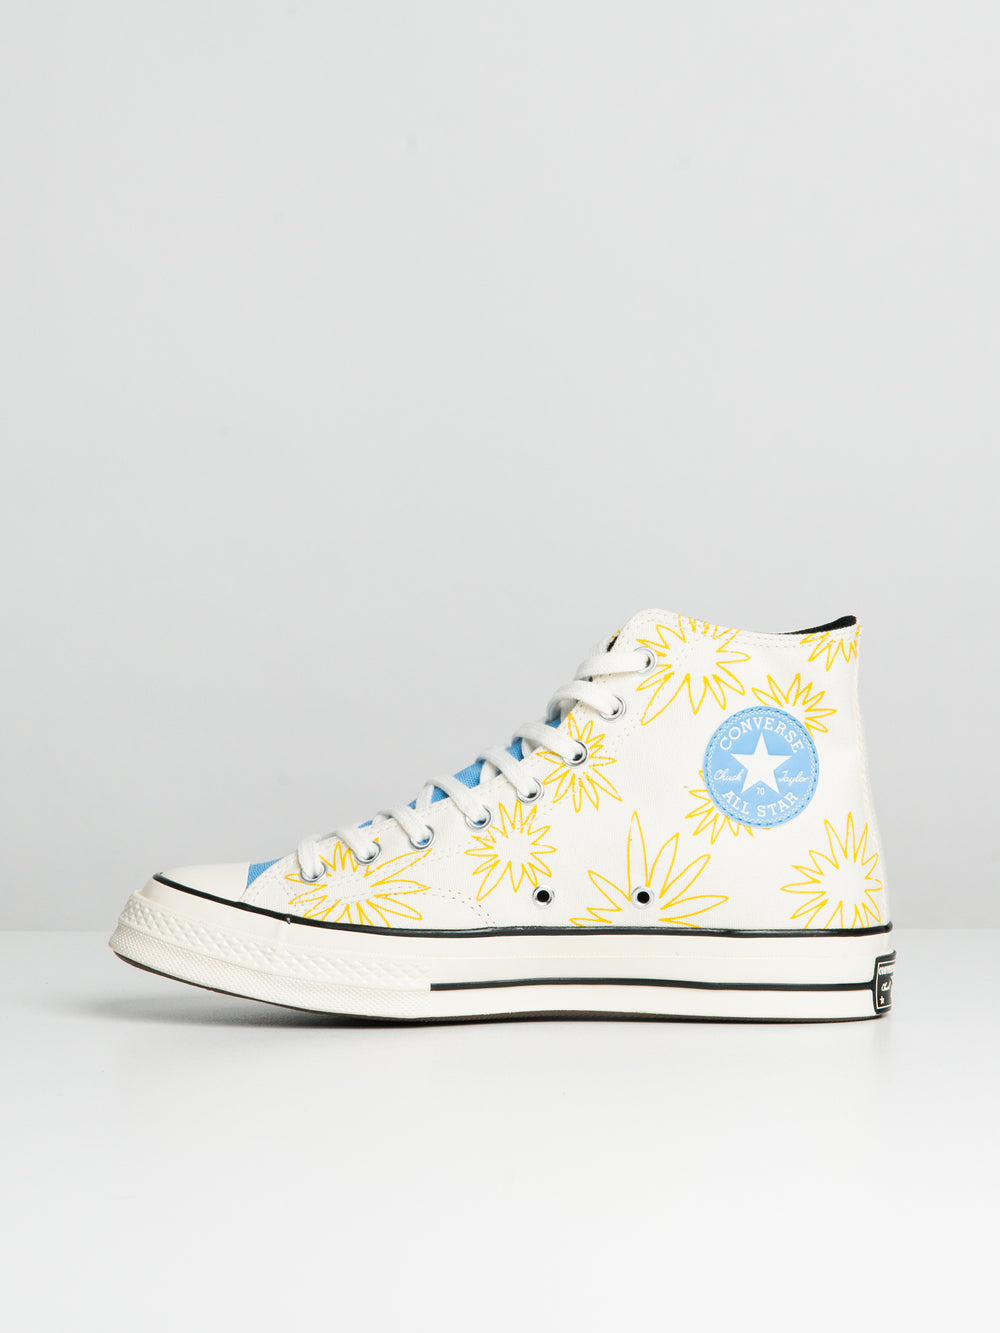 MENS CONVERSE CHUCK 70 BE NICE FLORAL HI SNEAKER - CLEARANCE